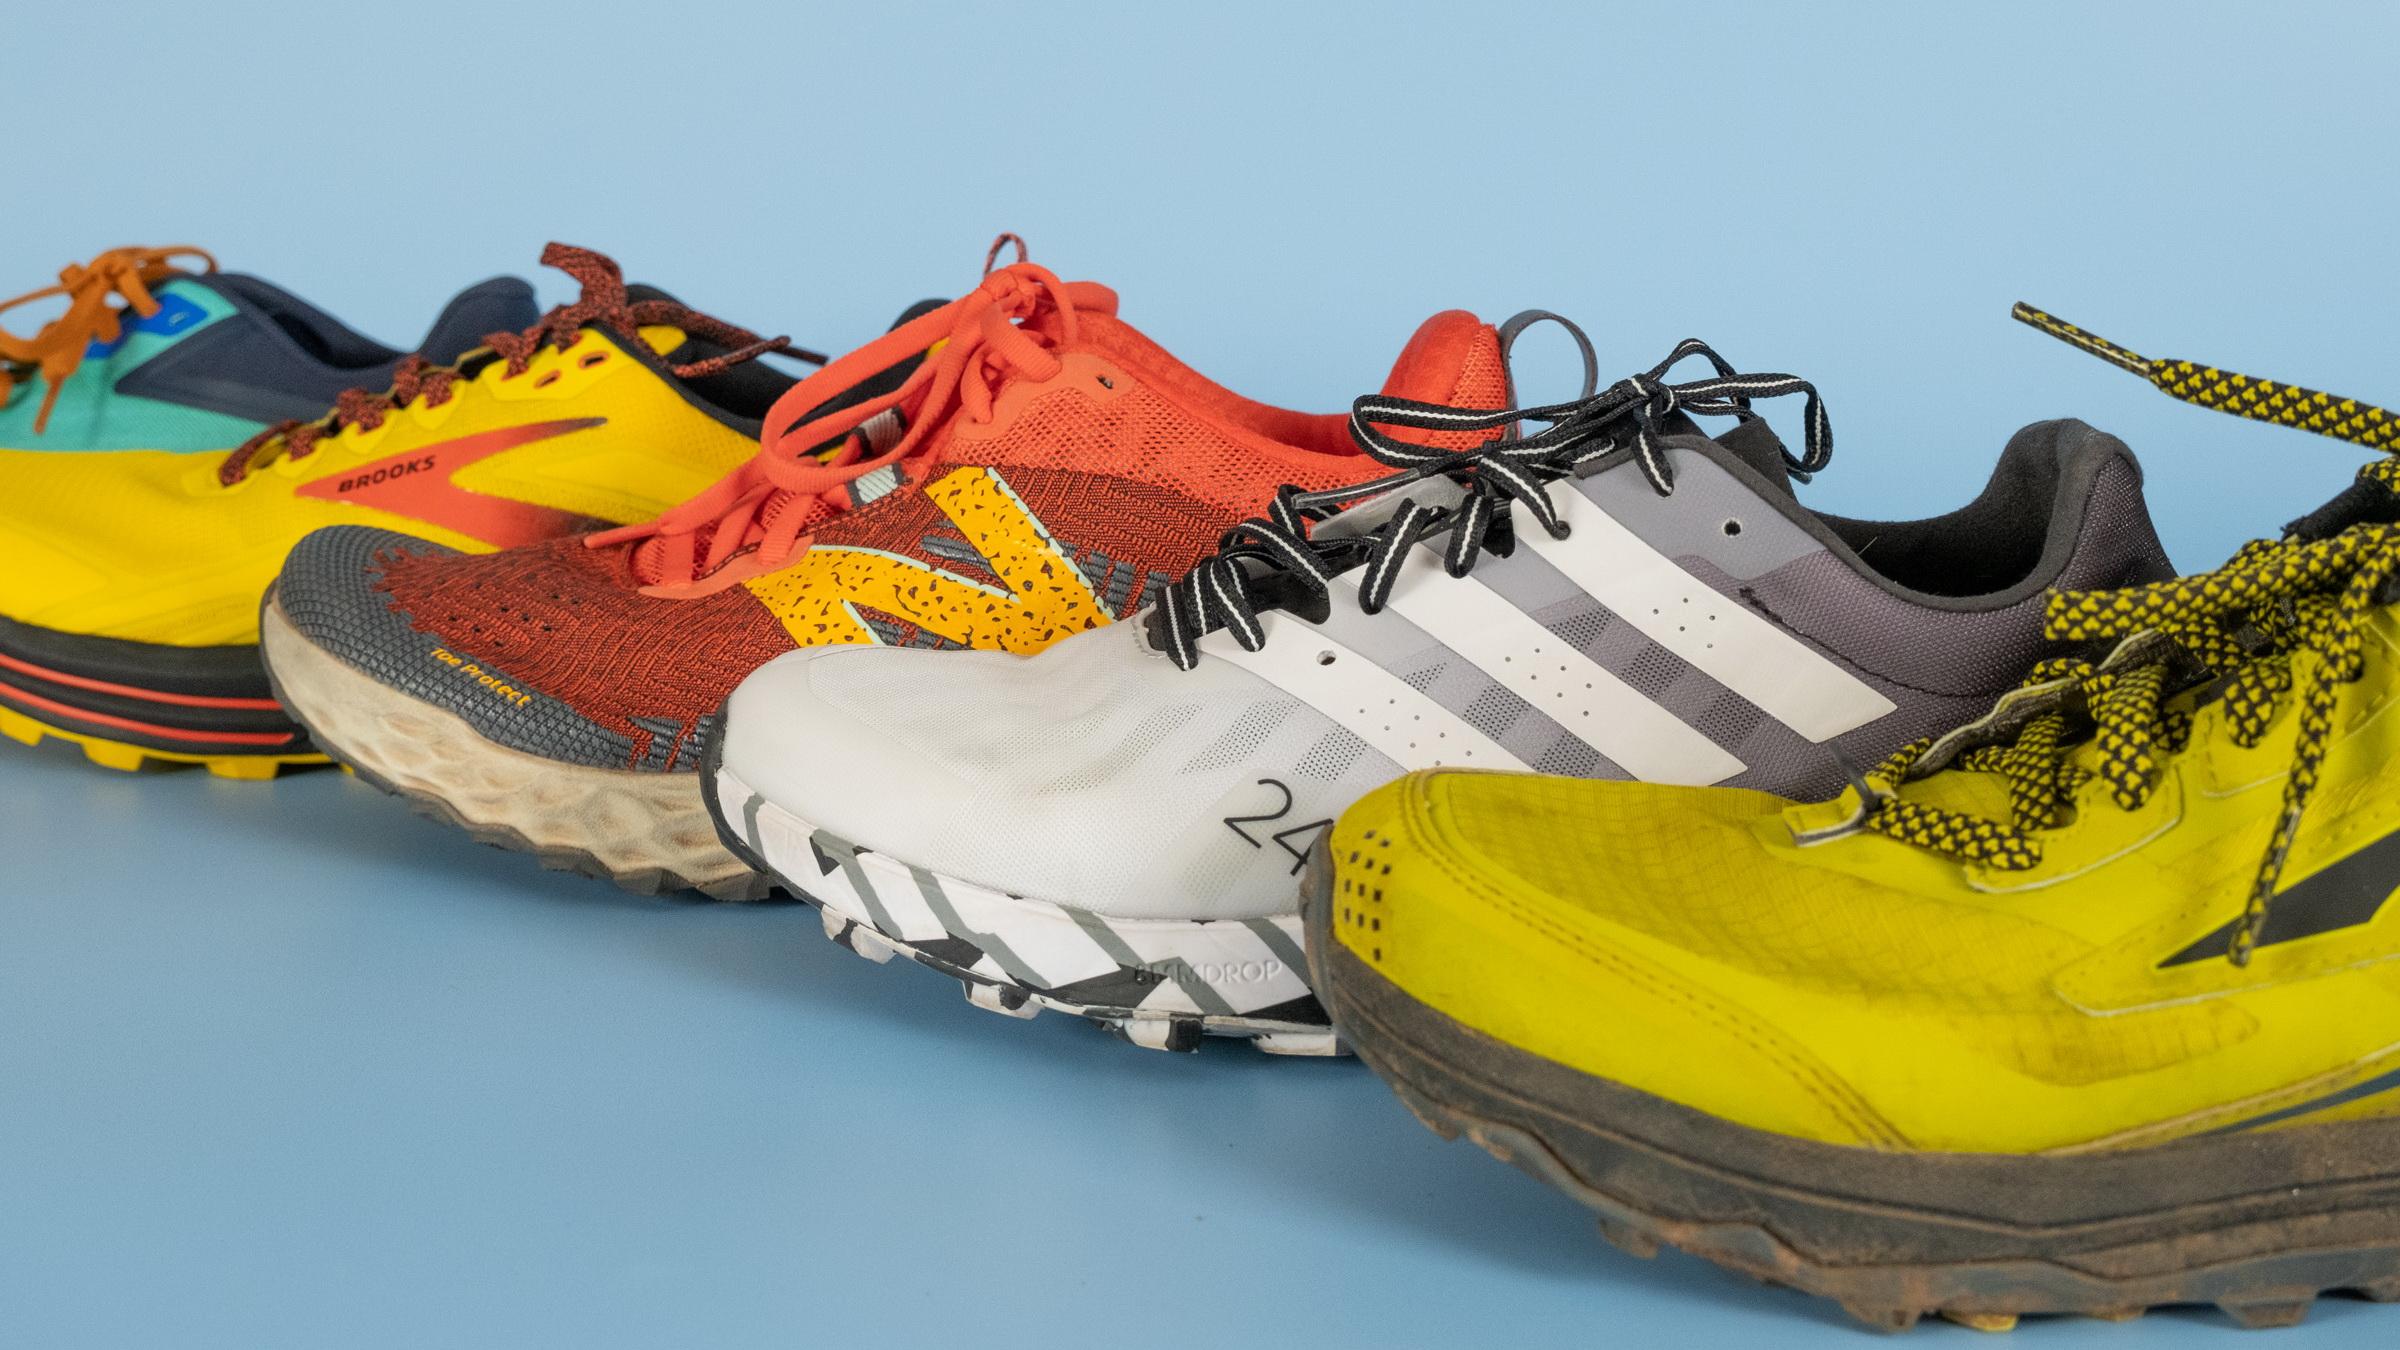 7 Best Trail Running Shoes For Hiking, 30+ Shoes Tested in 2022